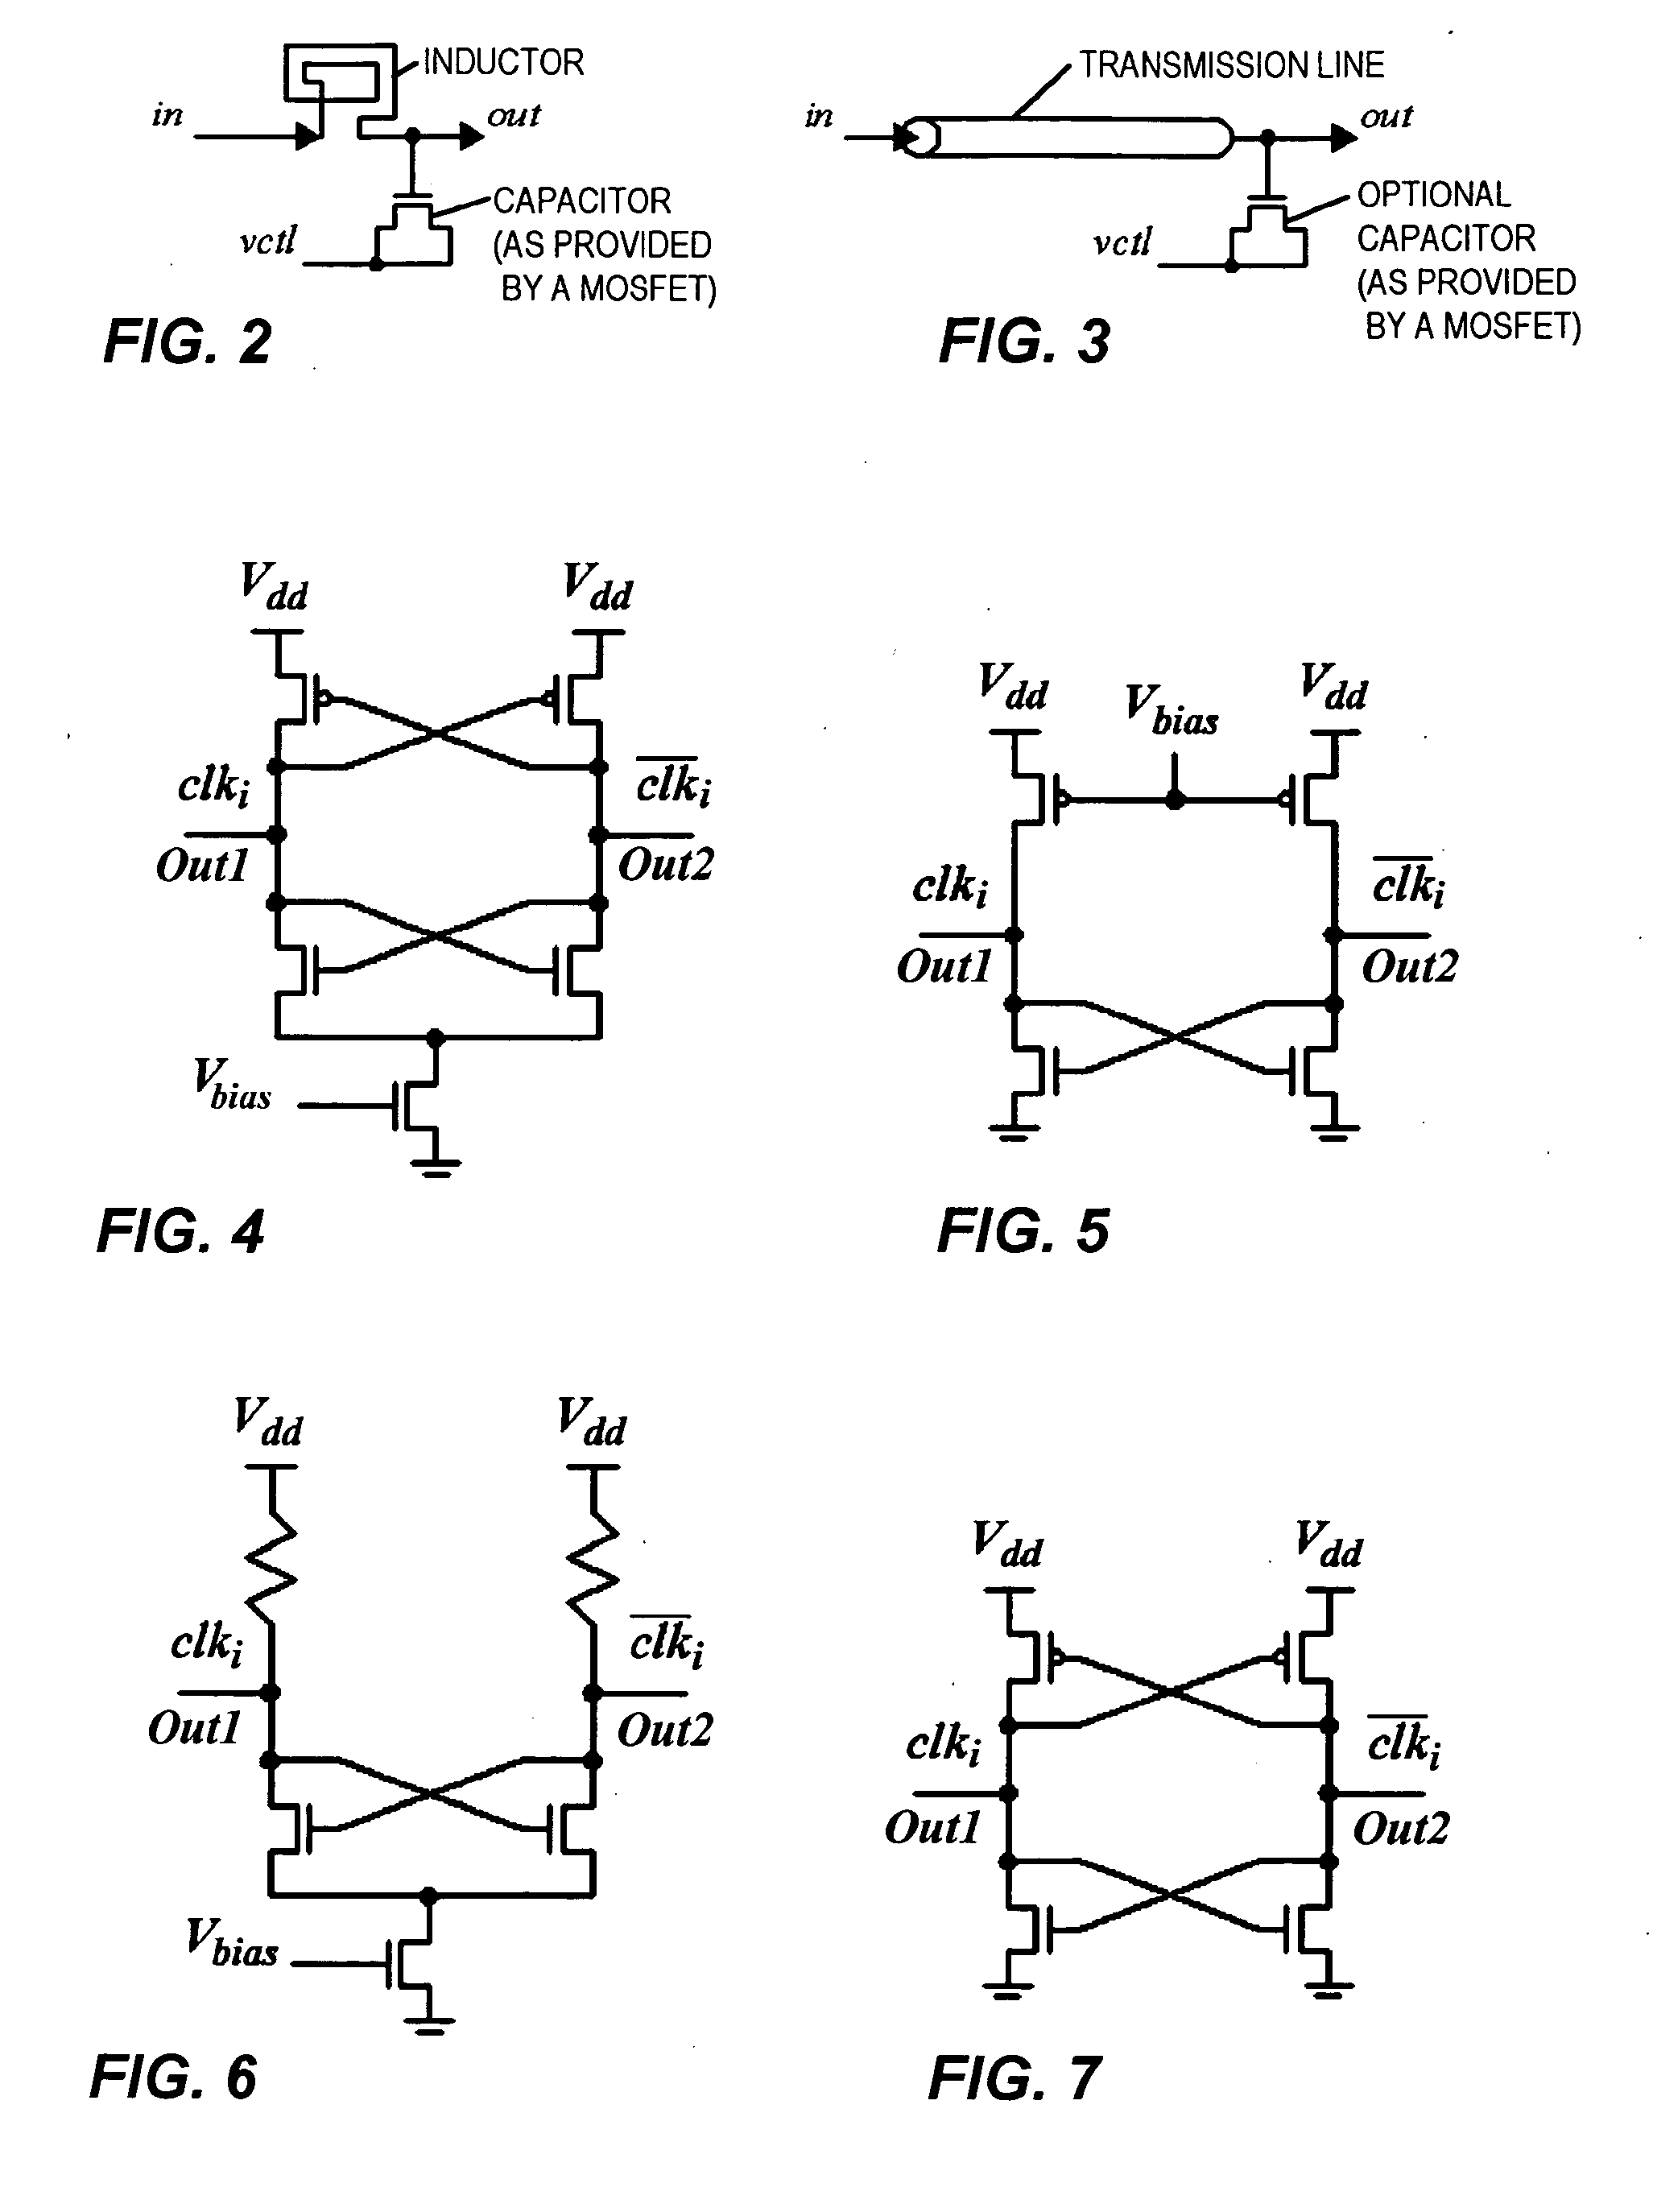 Electronic oscillators having a plurality of phased outputs and such oscillators with phase-setting and phase-reversal capability